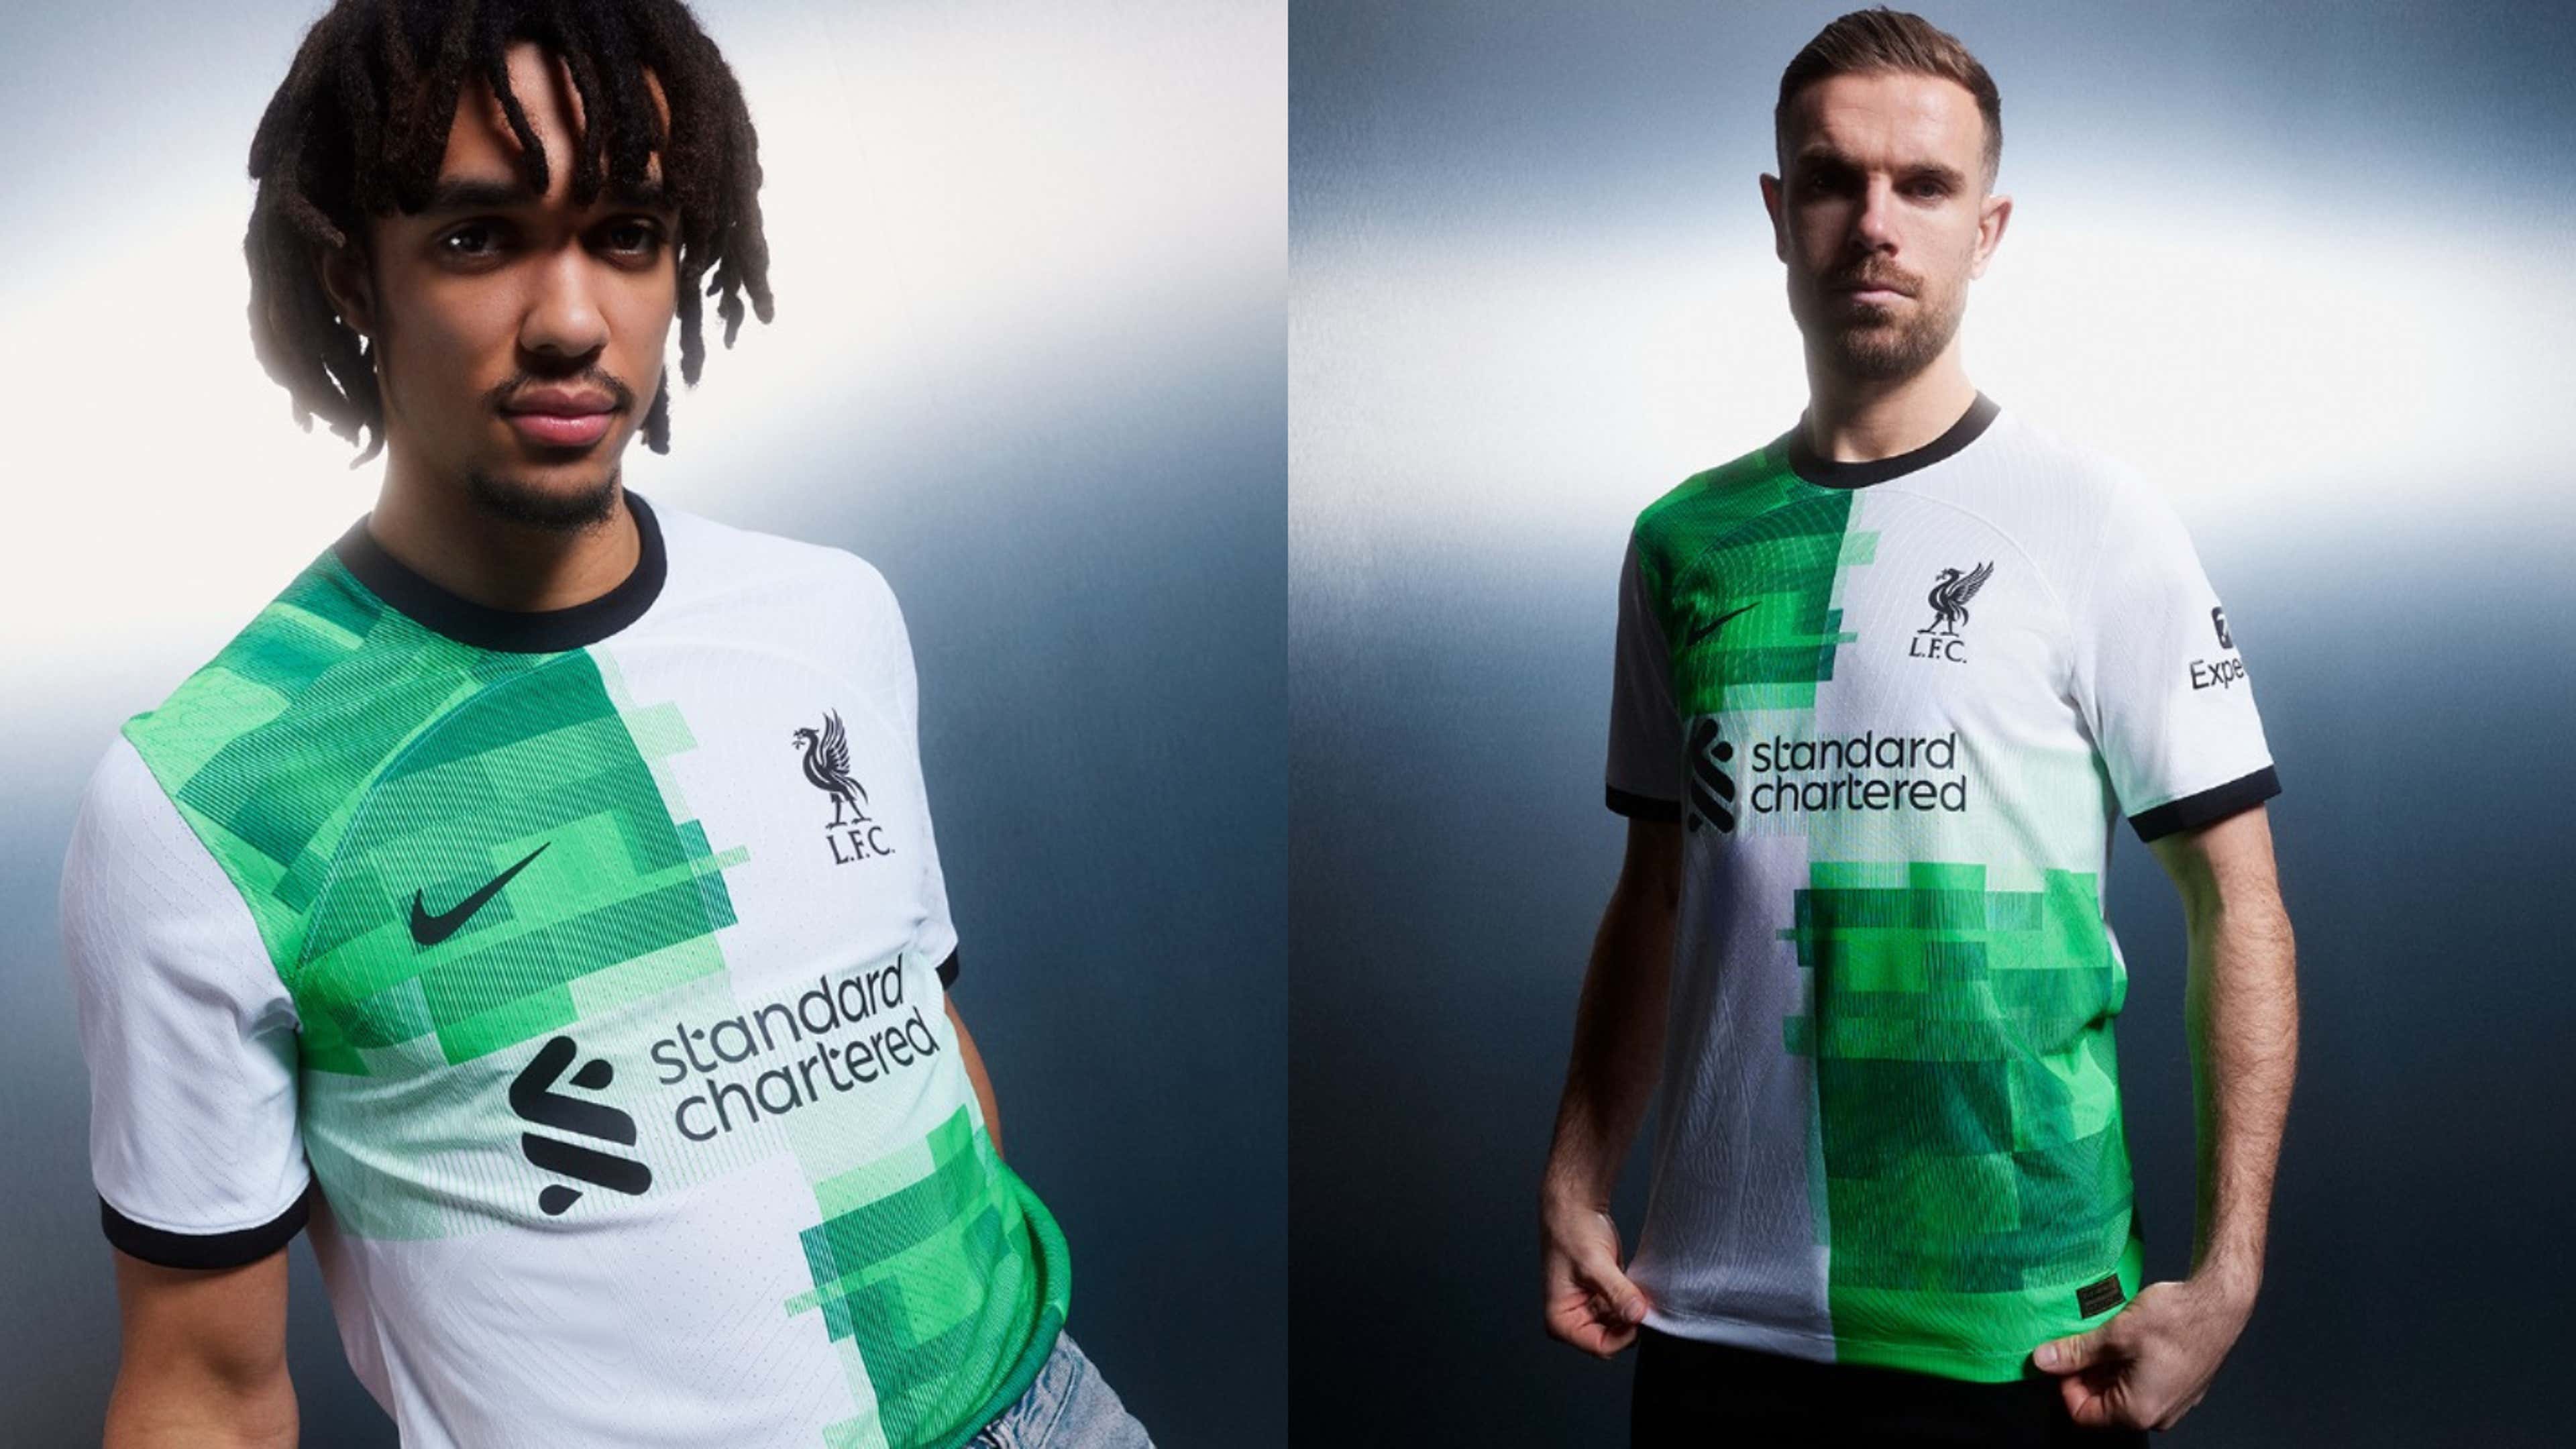 Purple Is The New Orange: Liverpool Release 18/19 Away Kit - The